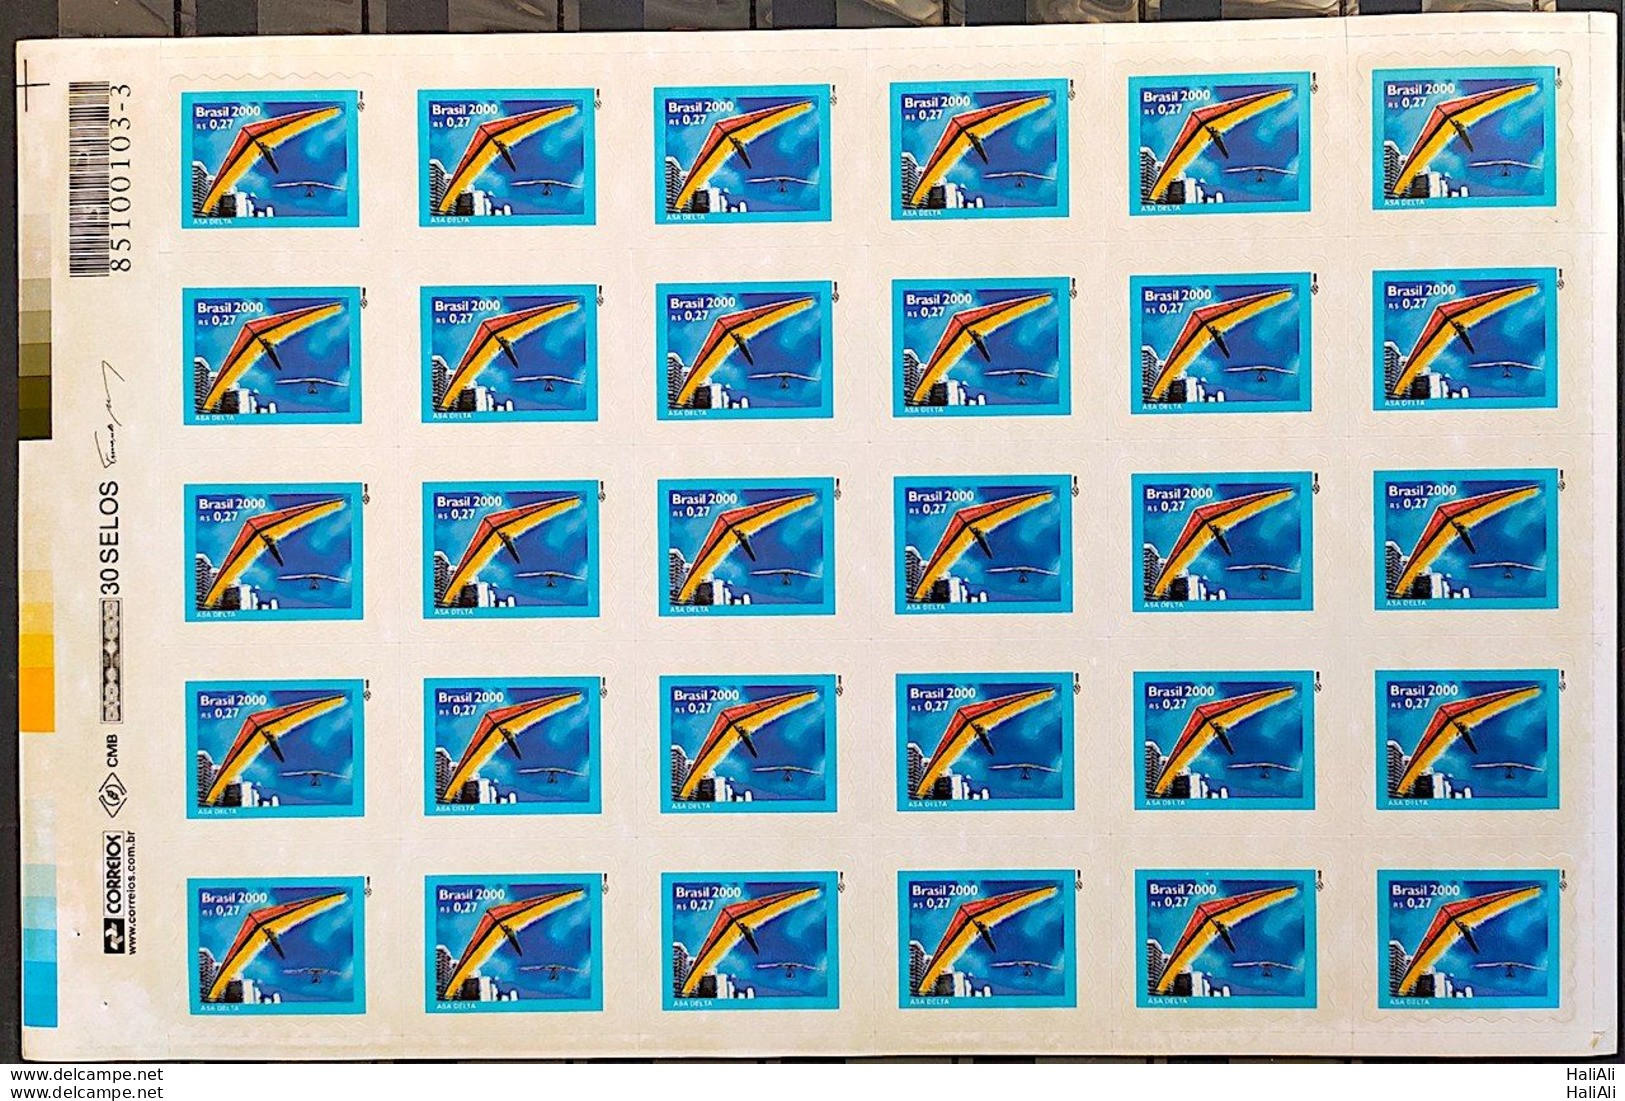 Brazil Regular Stamp RHM 787 Extreme Sports Hang Gliding Perce In Wave 2000 Sheet - Unused Stamps